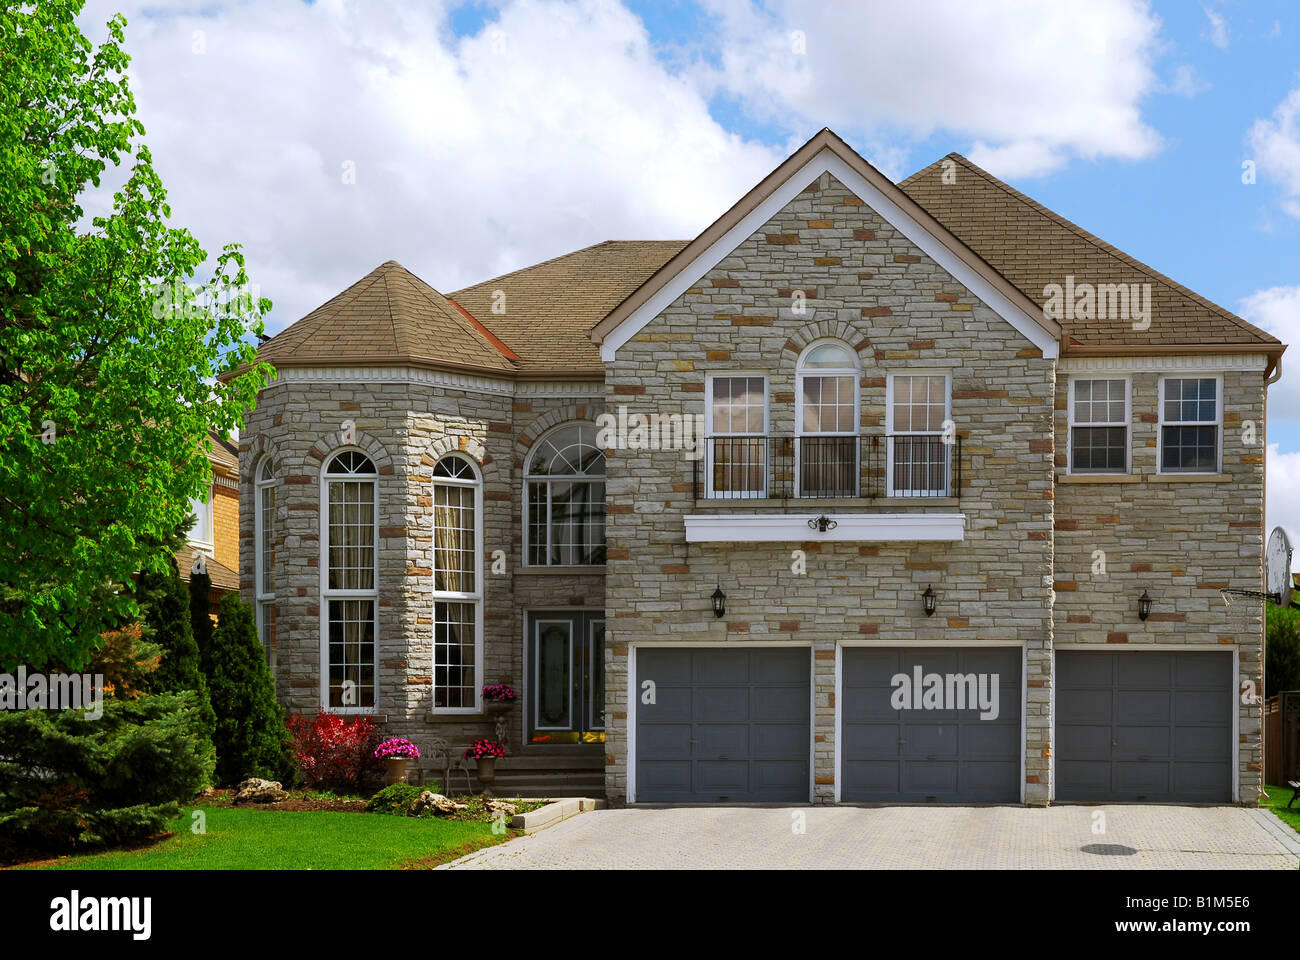 Big luxury residential house with natural stone facing Stock Photo